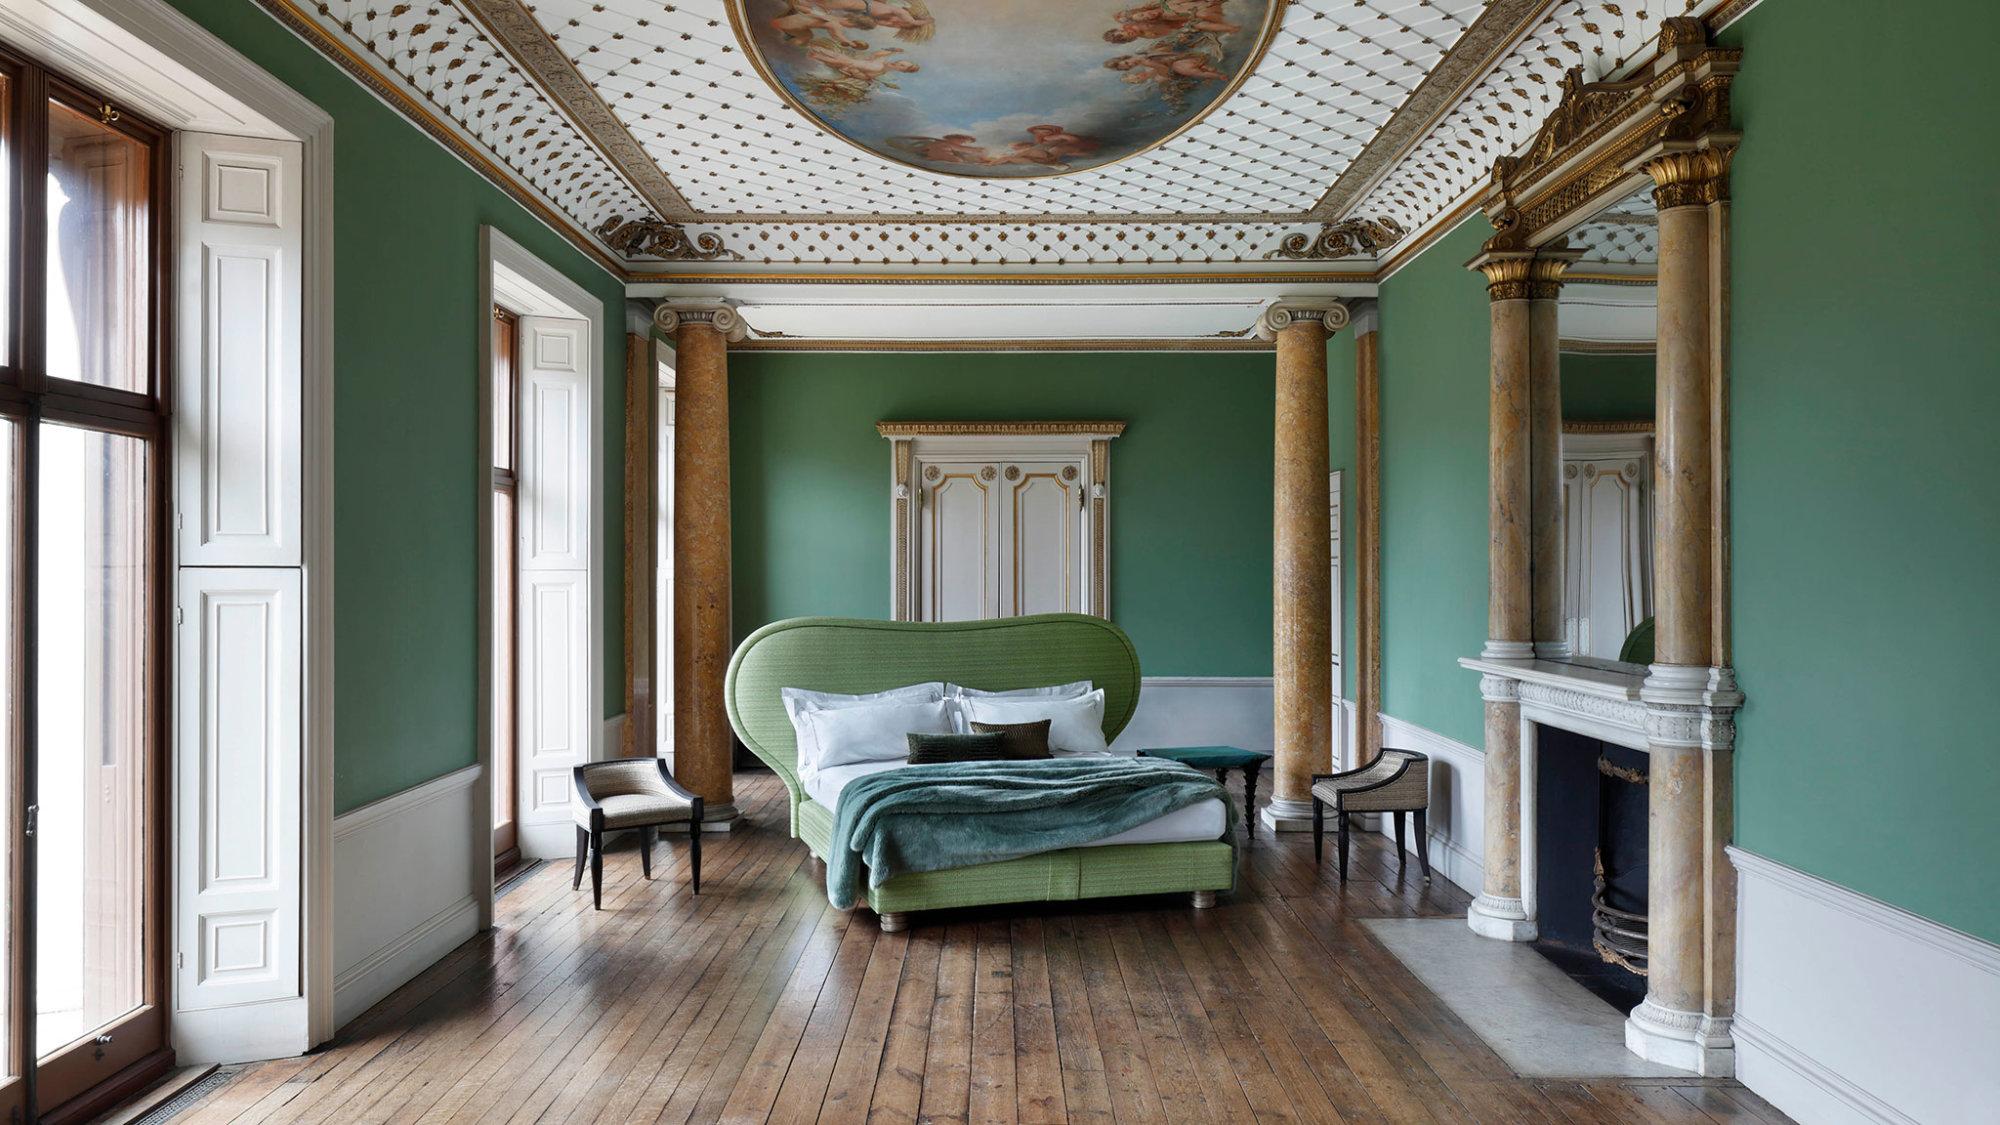 Globally renowned interior designer, Francis Sultana showcases his unique aesthetic with the creation of the Louis bed. Inspired by Elizabethan ruffs and collars, the Louis boasts curved, winged edges. A bespoke green tweed fabric and specially made